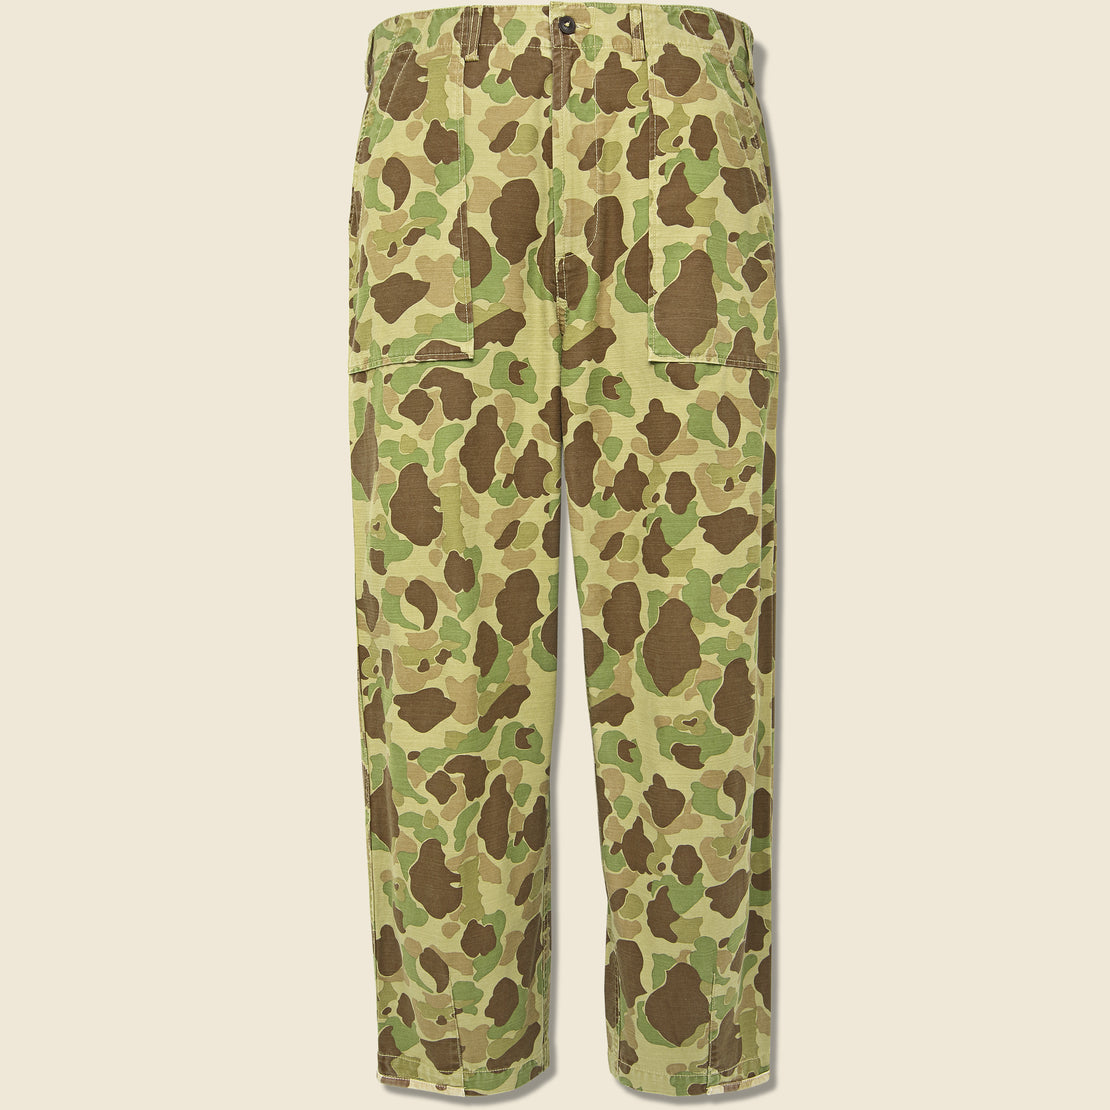 Universal Works Patched Peacekeeper Camo Fatigue Pant - Olive/Sand